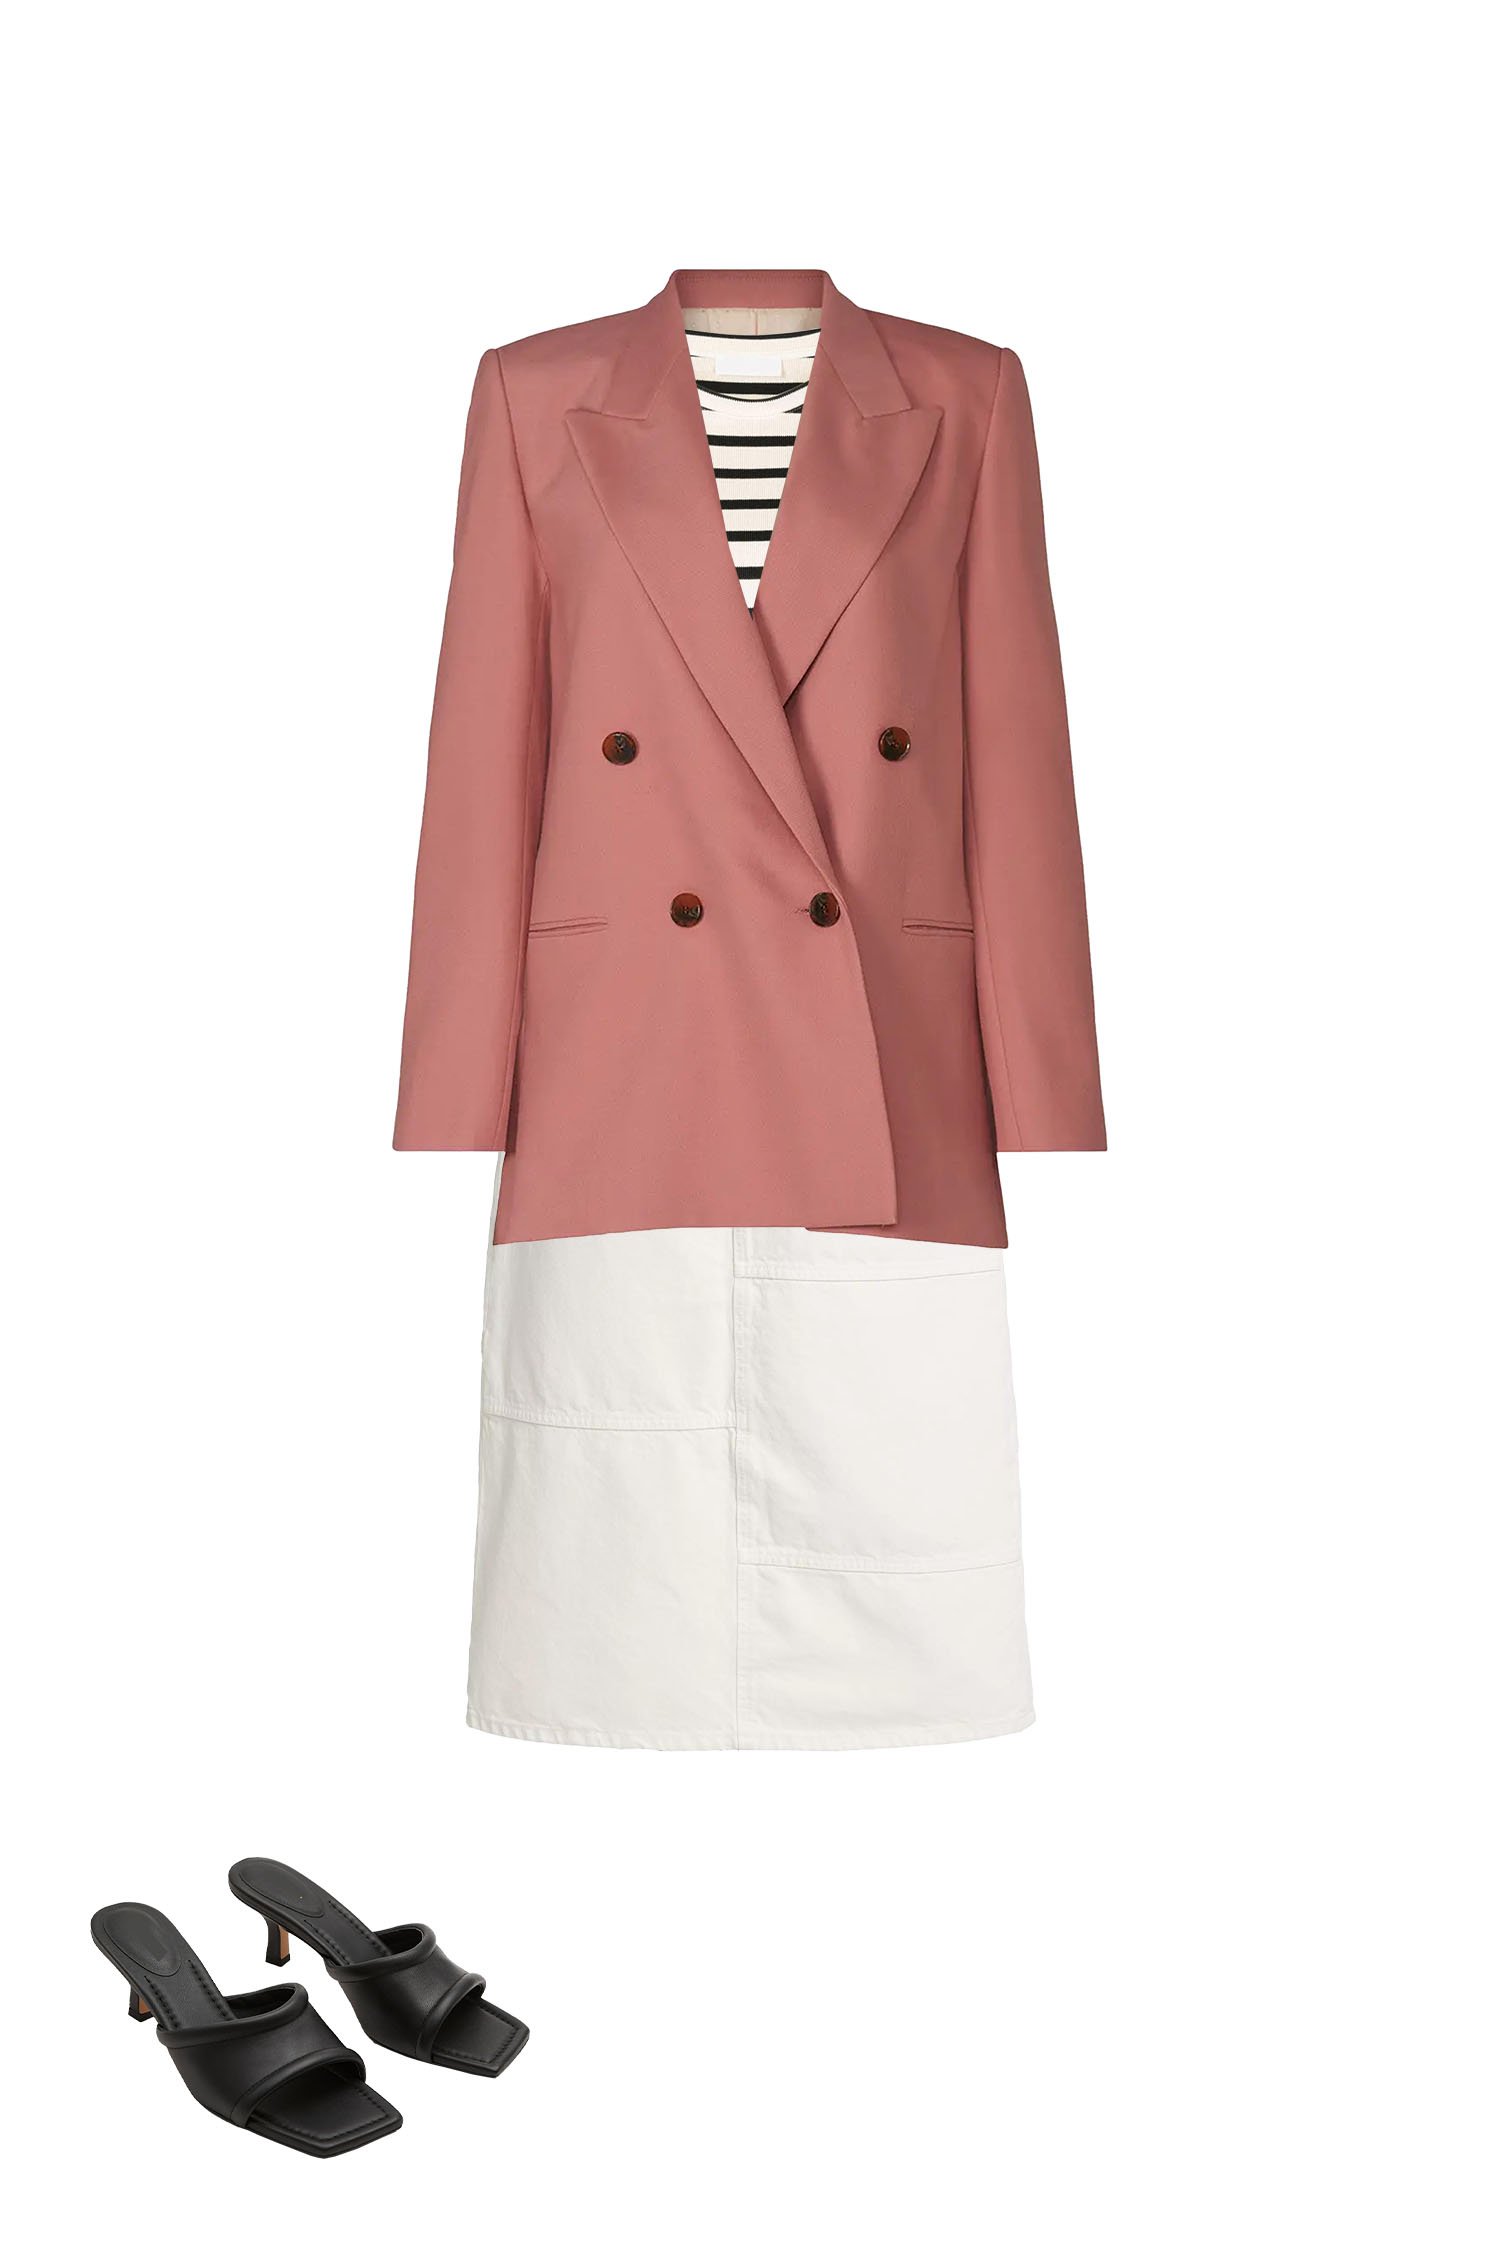 White Jeans A-Line Skirt with Cream and Black Stripe T-shirt, Rose Pink Blazer and Black Square Toe Kitten Heel Sandals